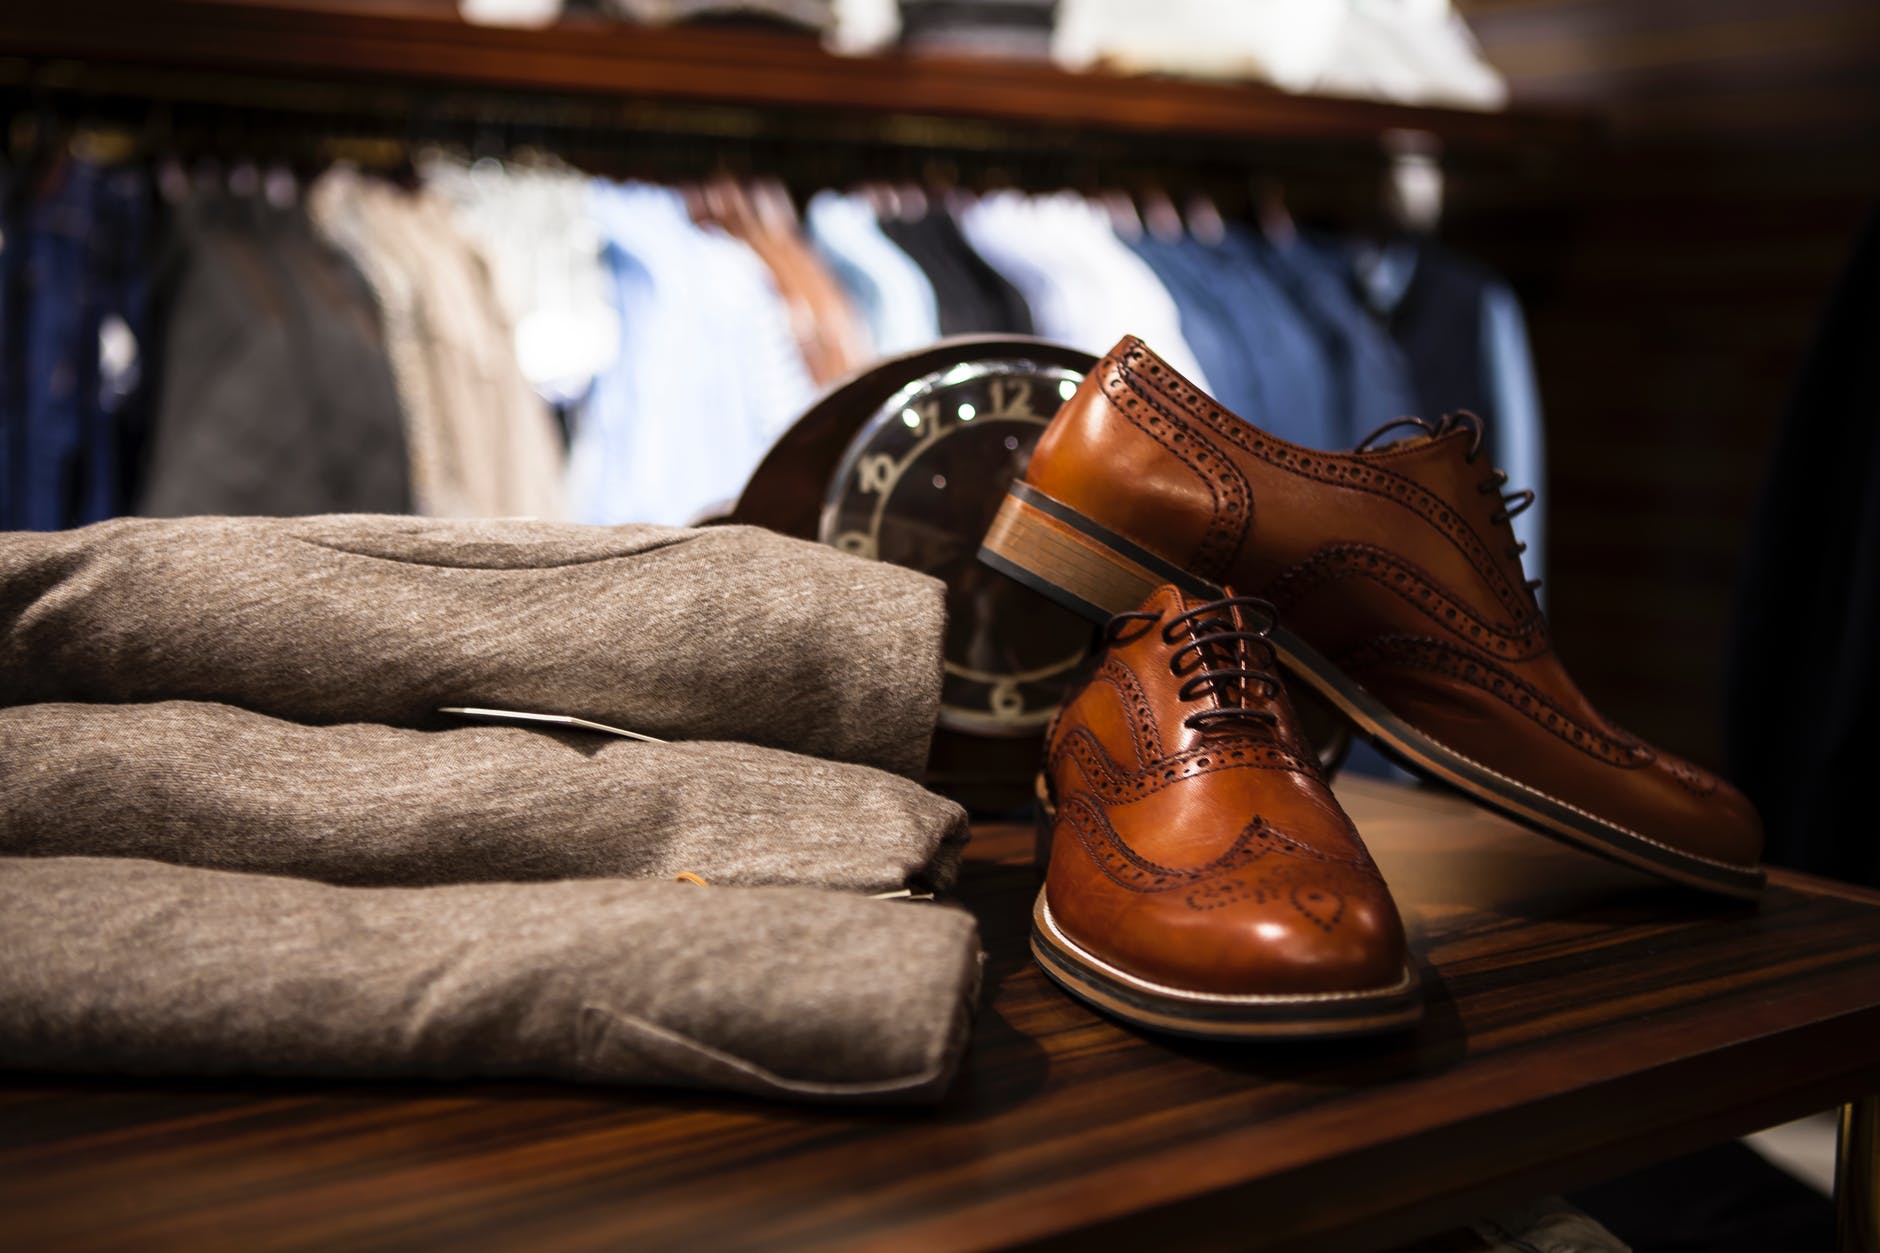 pair of brown leather wingtip shoes beside gray apparel on wooden surface